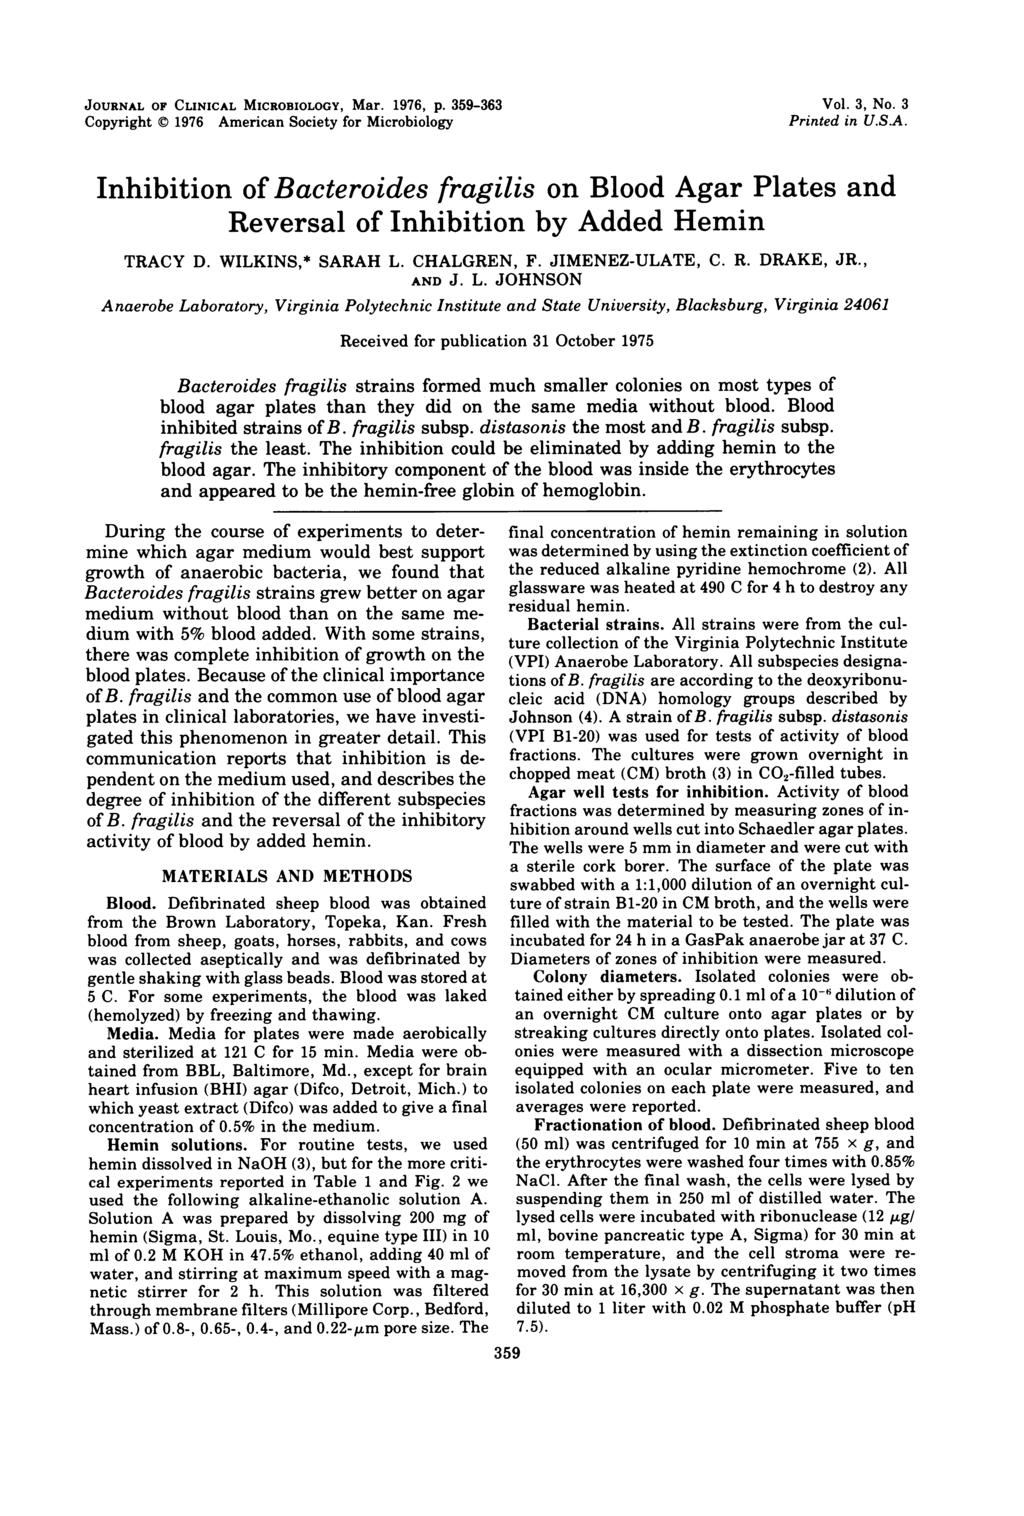 JOURNAL OF CLINICAL MICROBIOLOGY, Mar. 1976, p. 359-363 Copyright 1976 American Society for Microbiology Vol. 3, No. 3 Printed in U.S.A. Inhibition of Bacteroides fragilis on Blood Agar Plates and Reversal of Inhibition by Added Hemin TRACY D.